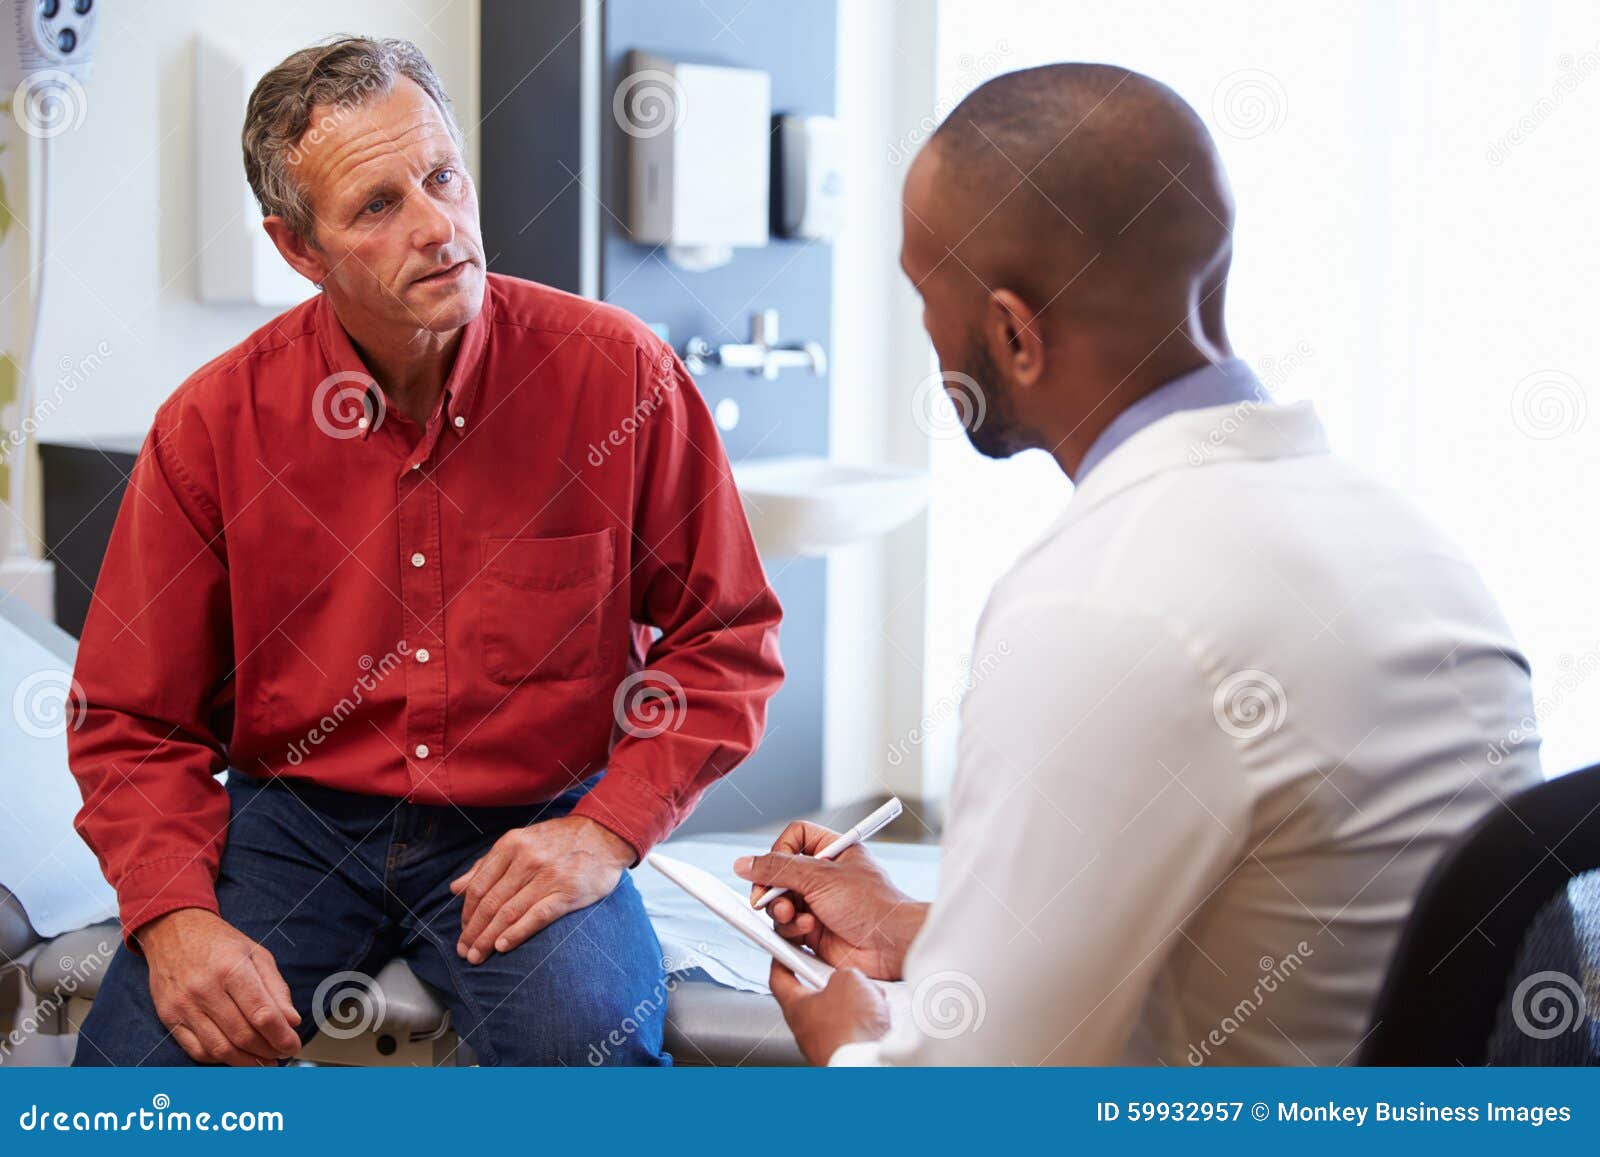 Male Patient And Doctor Have Consultation In Hospital Room Stock Image